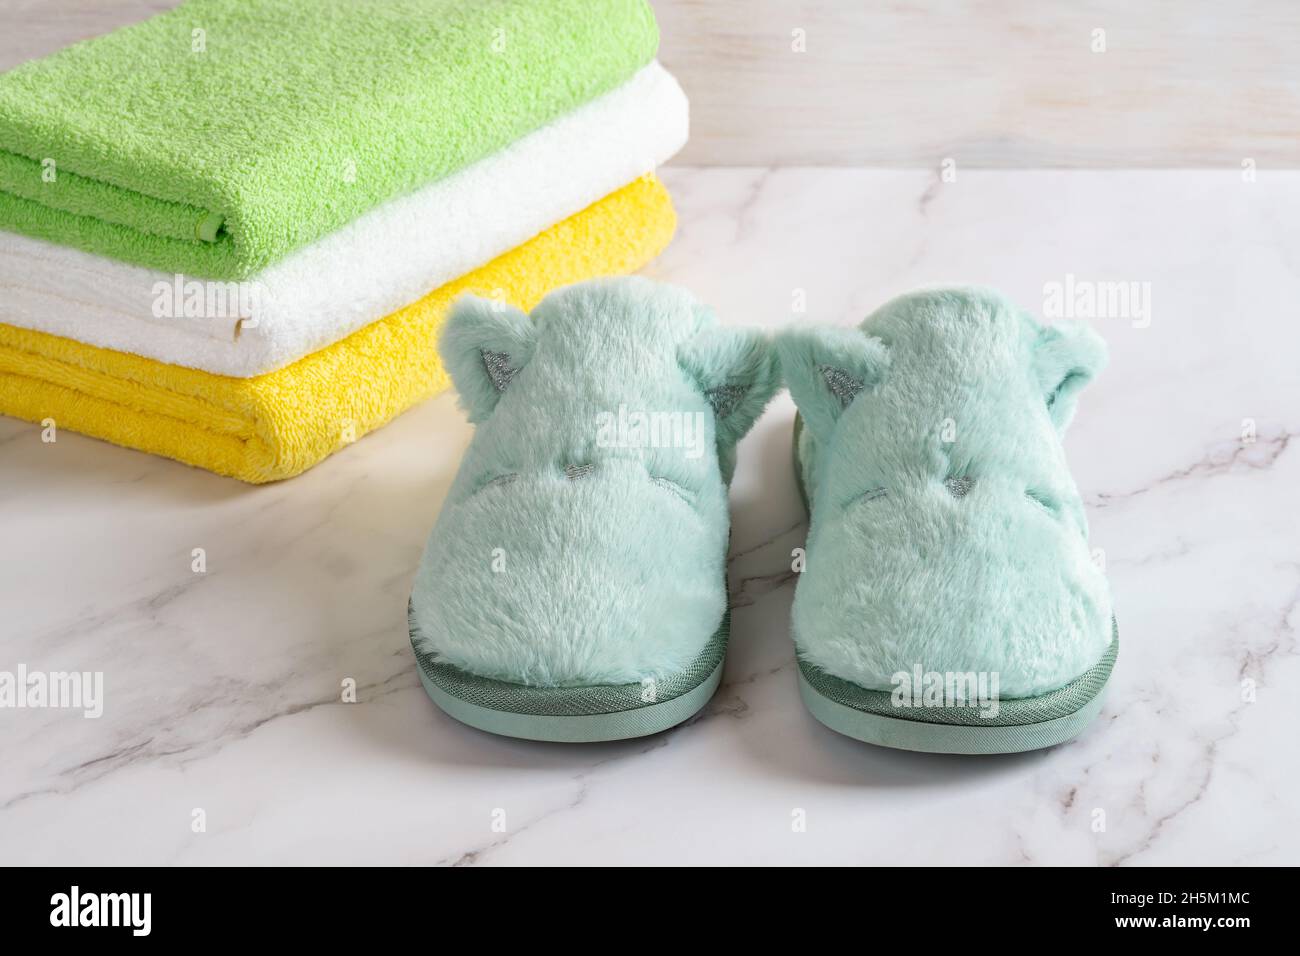 Funny cozy slippers near stack of colored terry towels over marble surface. Concepts of natural cotton toiletries, soft fleece shoes for home. Stock Photo